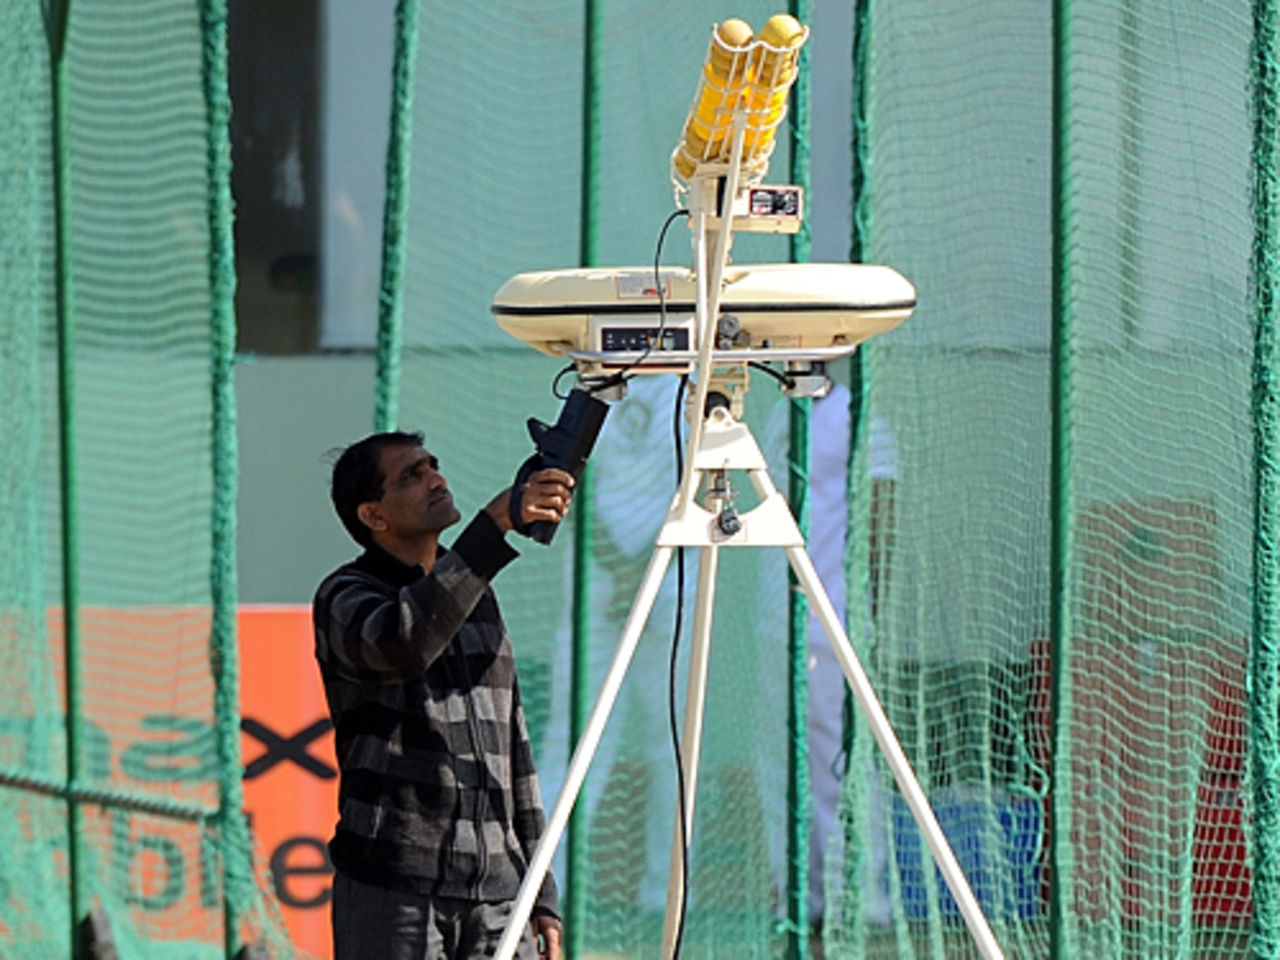 An Indian security official checks a bowling machine in the nets prior to a training session, Jaipur, February 20, 2010